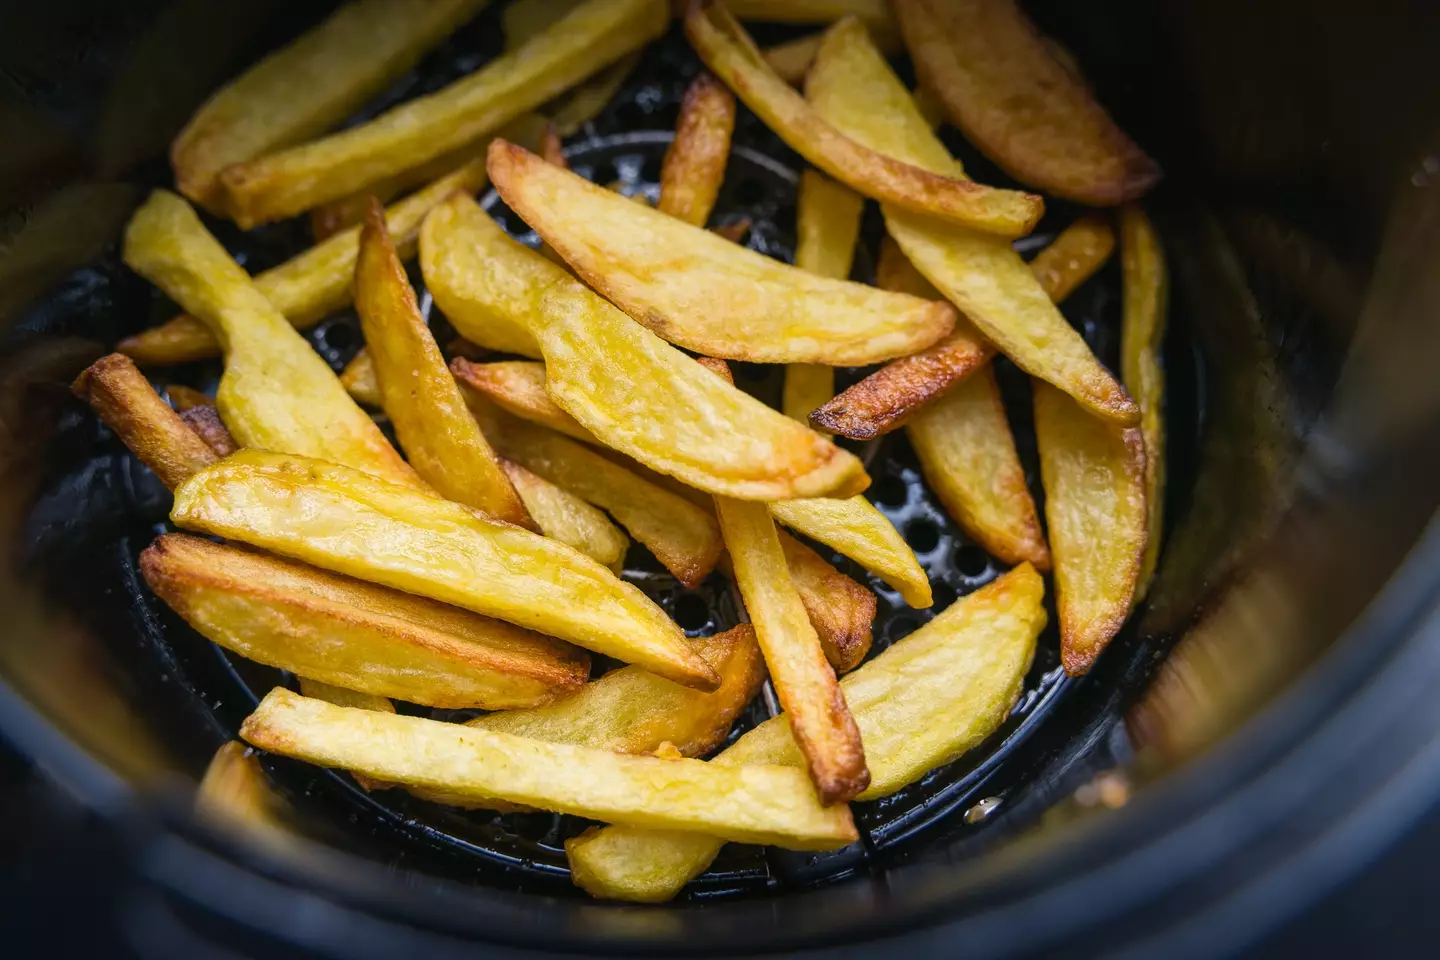 How do you make your airfryer chips?